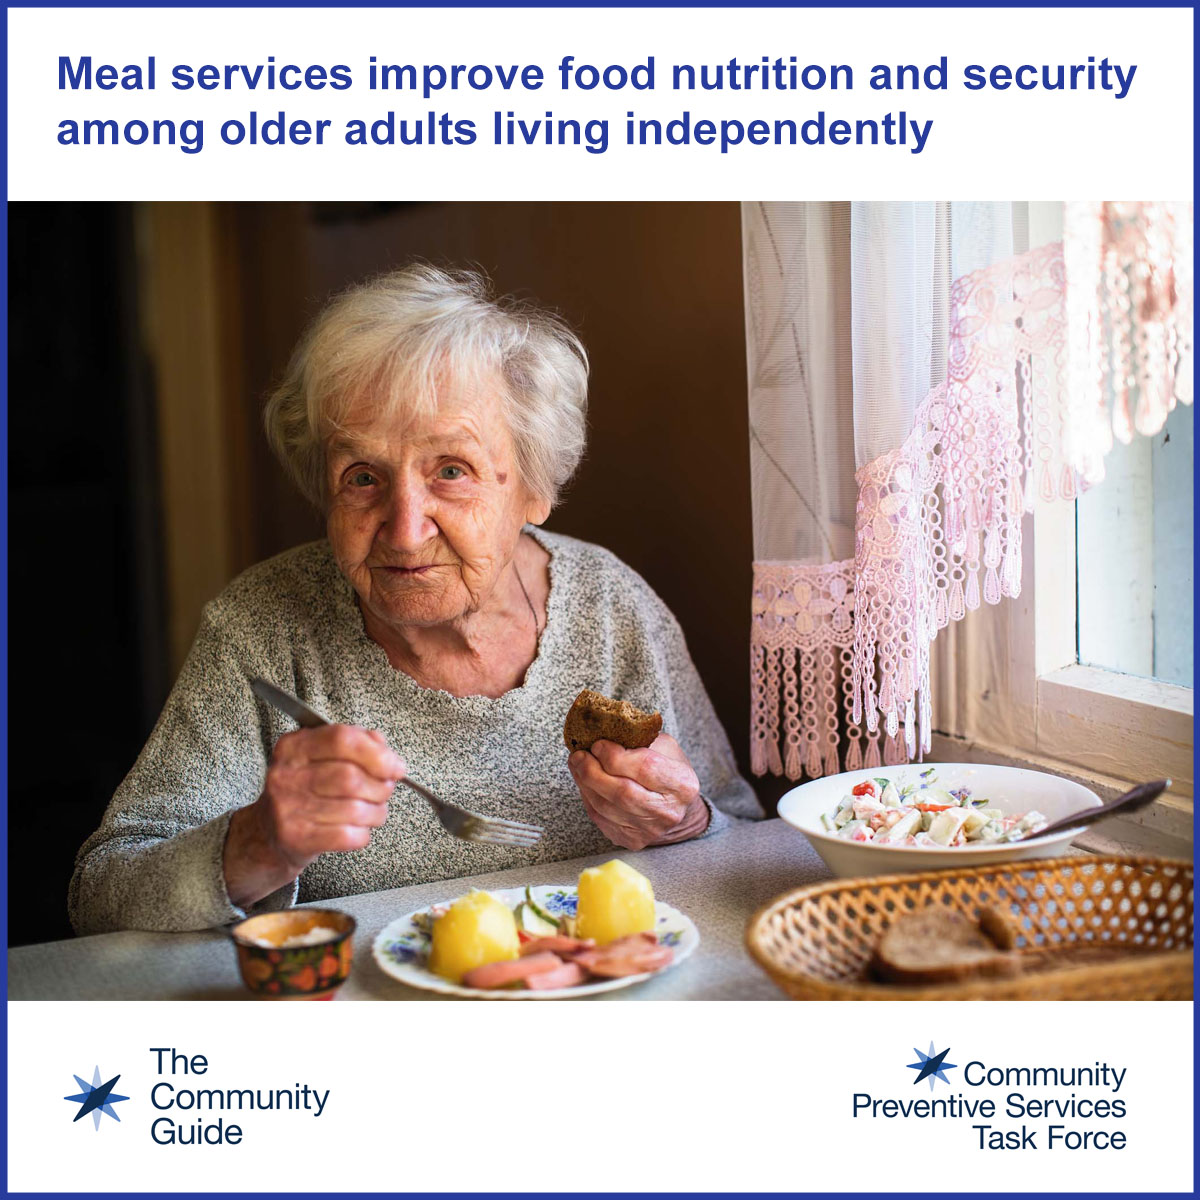 Use this image for social media to promote the CPSTF finding for Home-delivered Services for Older Adults